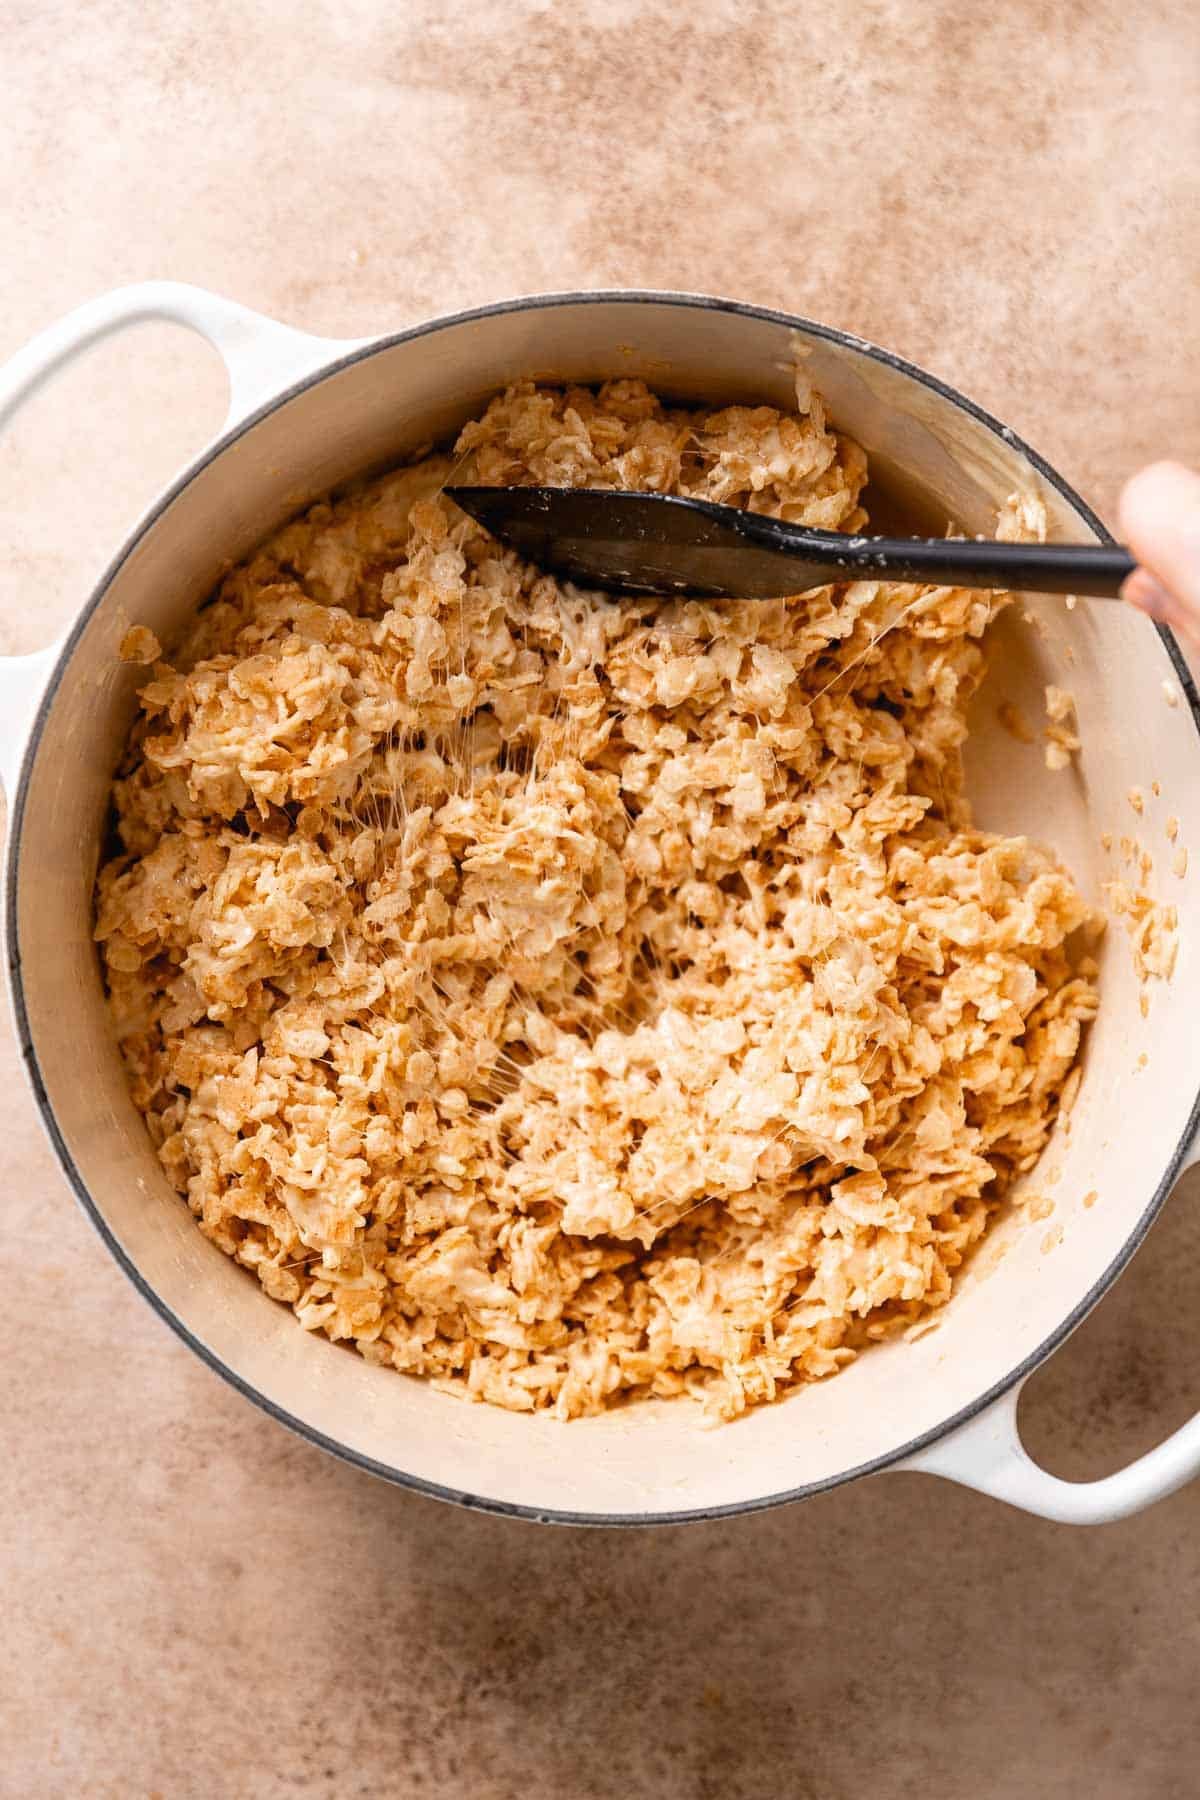 A rubber spatula folding the crispy rice cereal into the brown butter and melted marshmallow mixture.